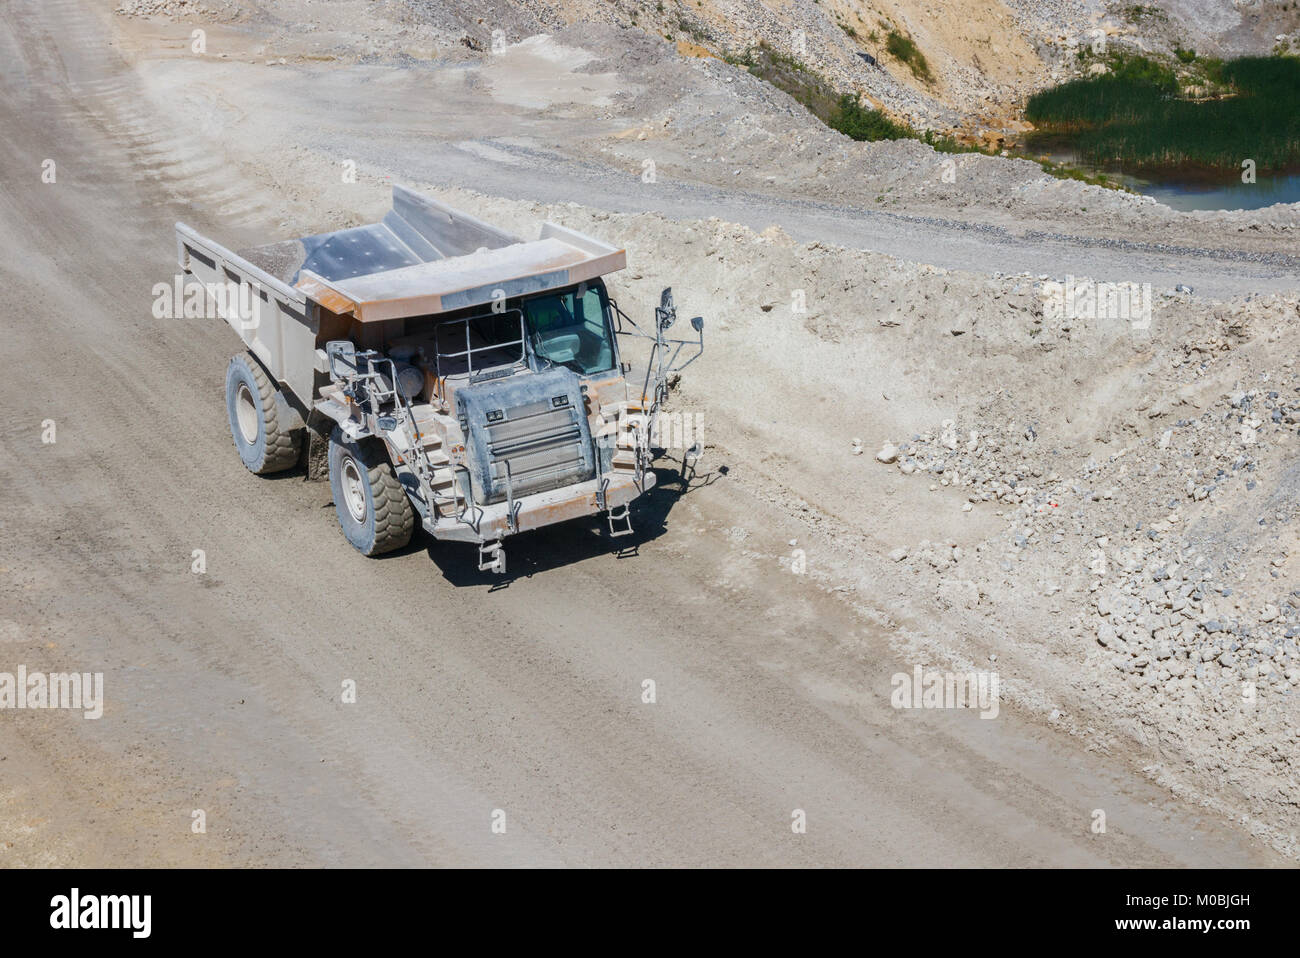 Huge dump truck driving along a dirt road at the ENCI (First Dutch Cement Industry) marl quarry at the Mount Saint Peter. Maastricht, The Netherlands. Stock Photo